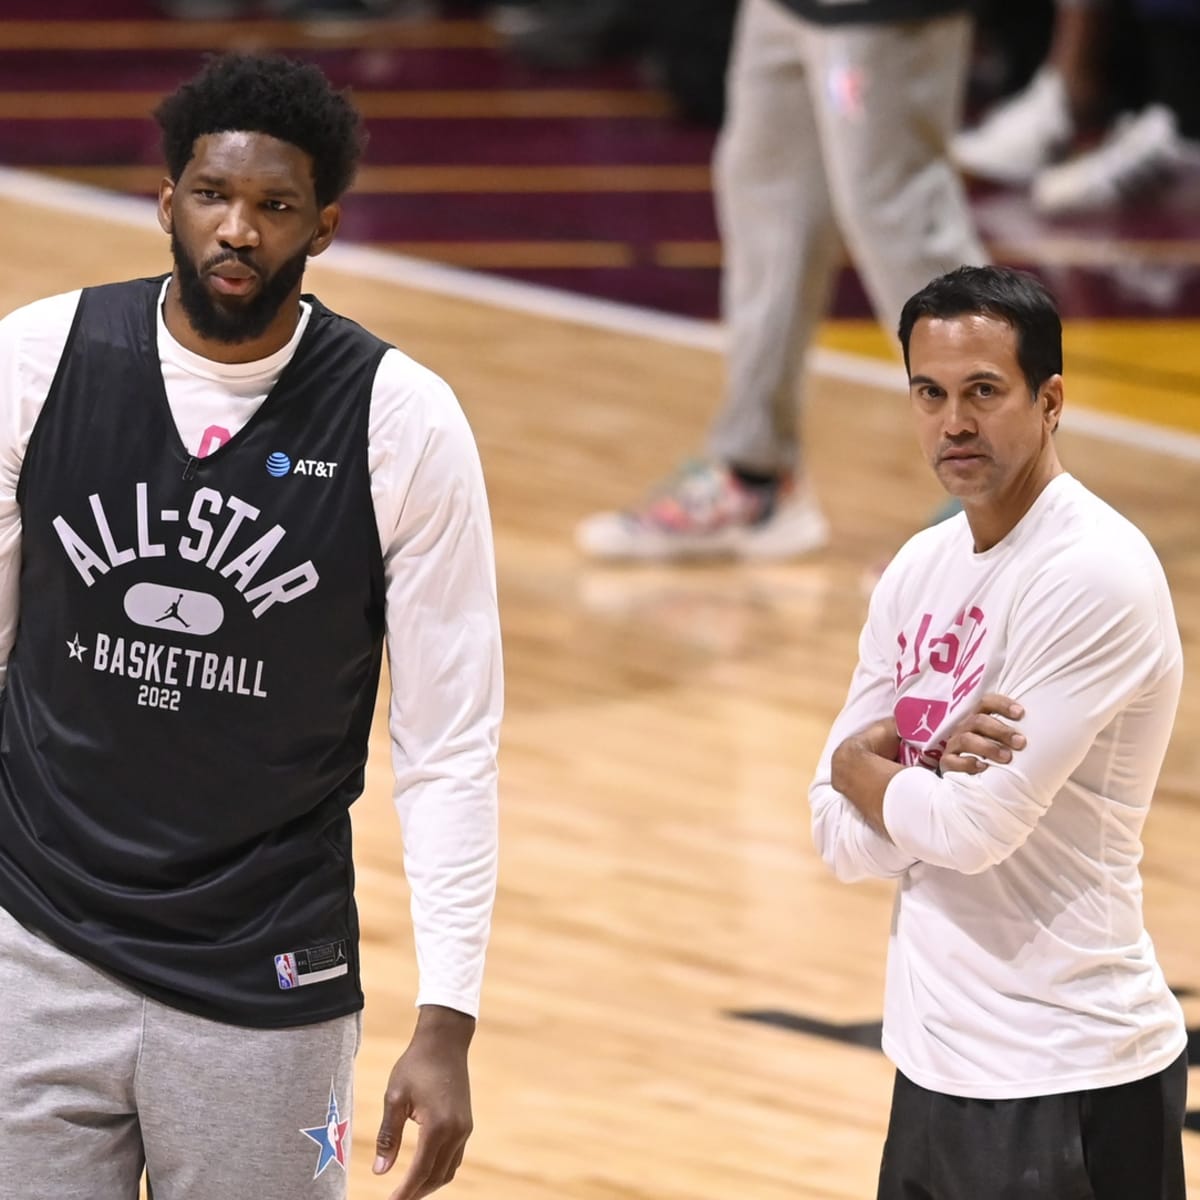 76ers How to Watch, Live Stream Joel Embiid, and Odds for 2022 NBA All-Star Game